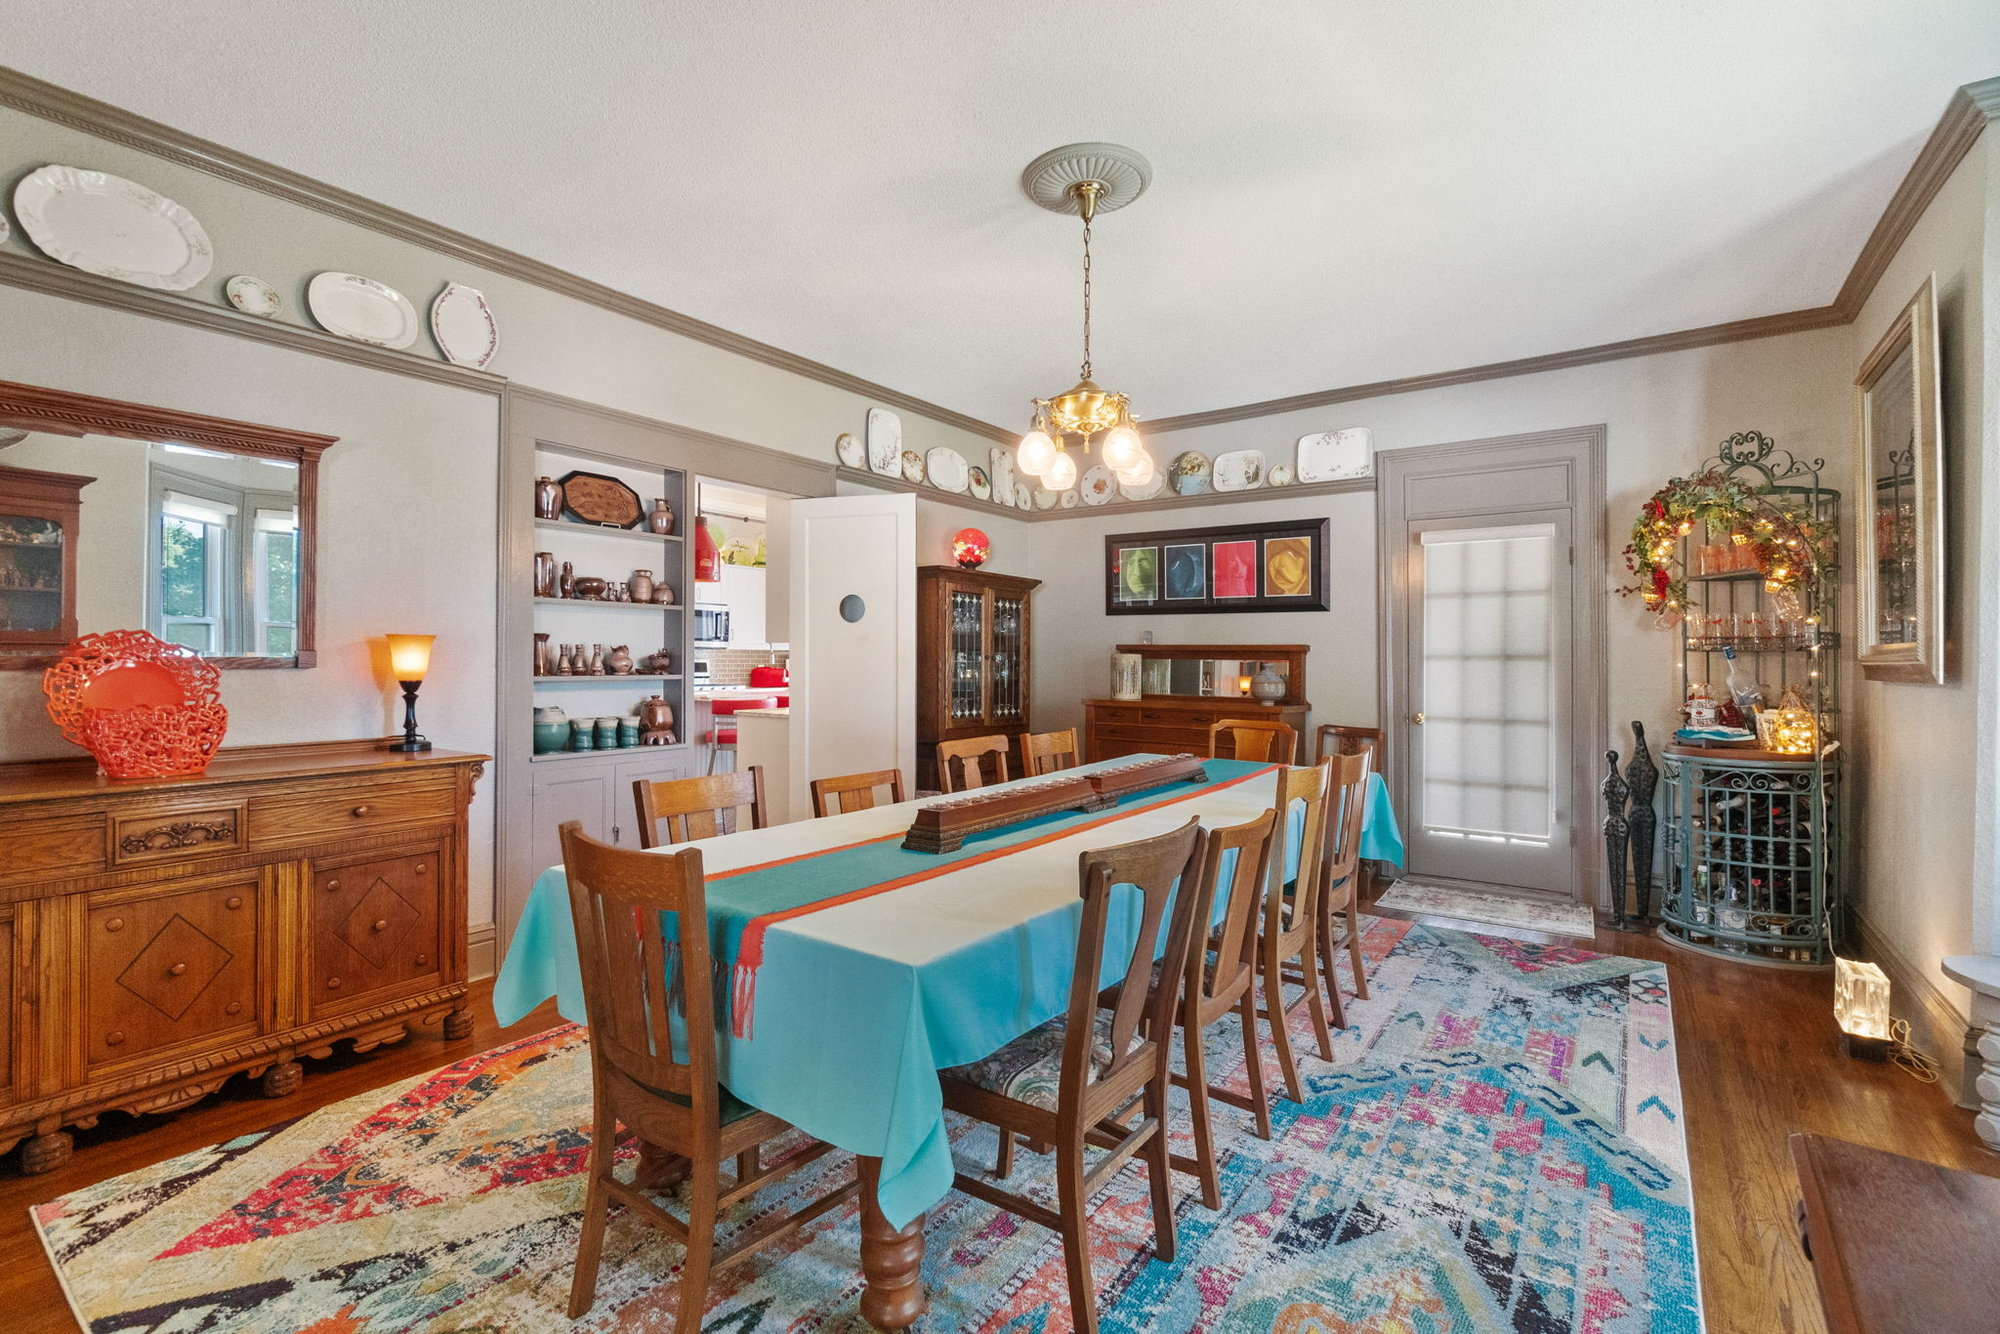 Historic Old World Charm and Character Abounds in this Beautiful Cedar Falls Home